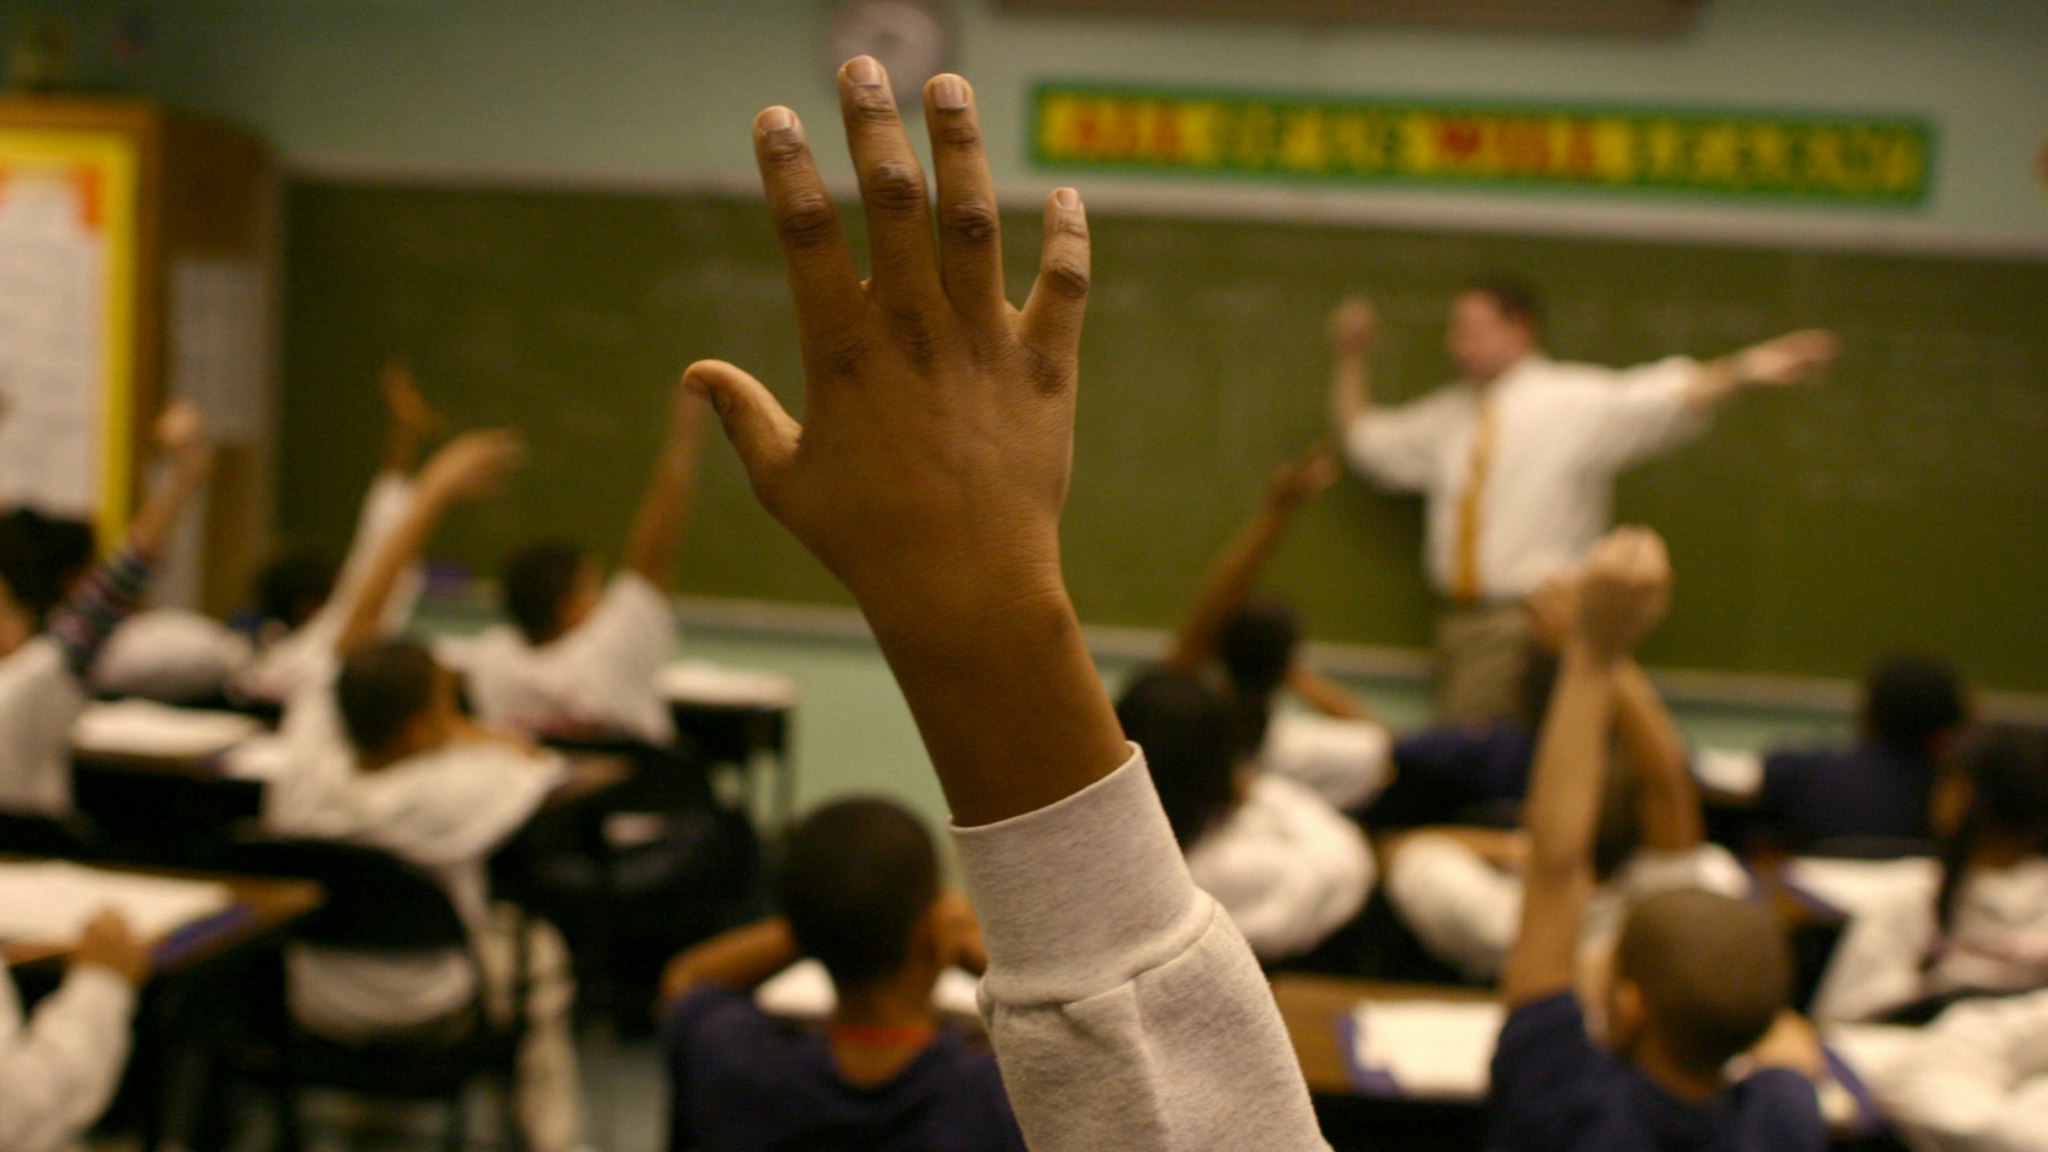 Students raise their hands to answer a teacher's question at the KIPP Academy in the South Bronx, part of a network of public middle schools that is becoming a model for educating poor children.